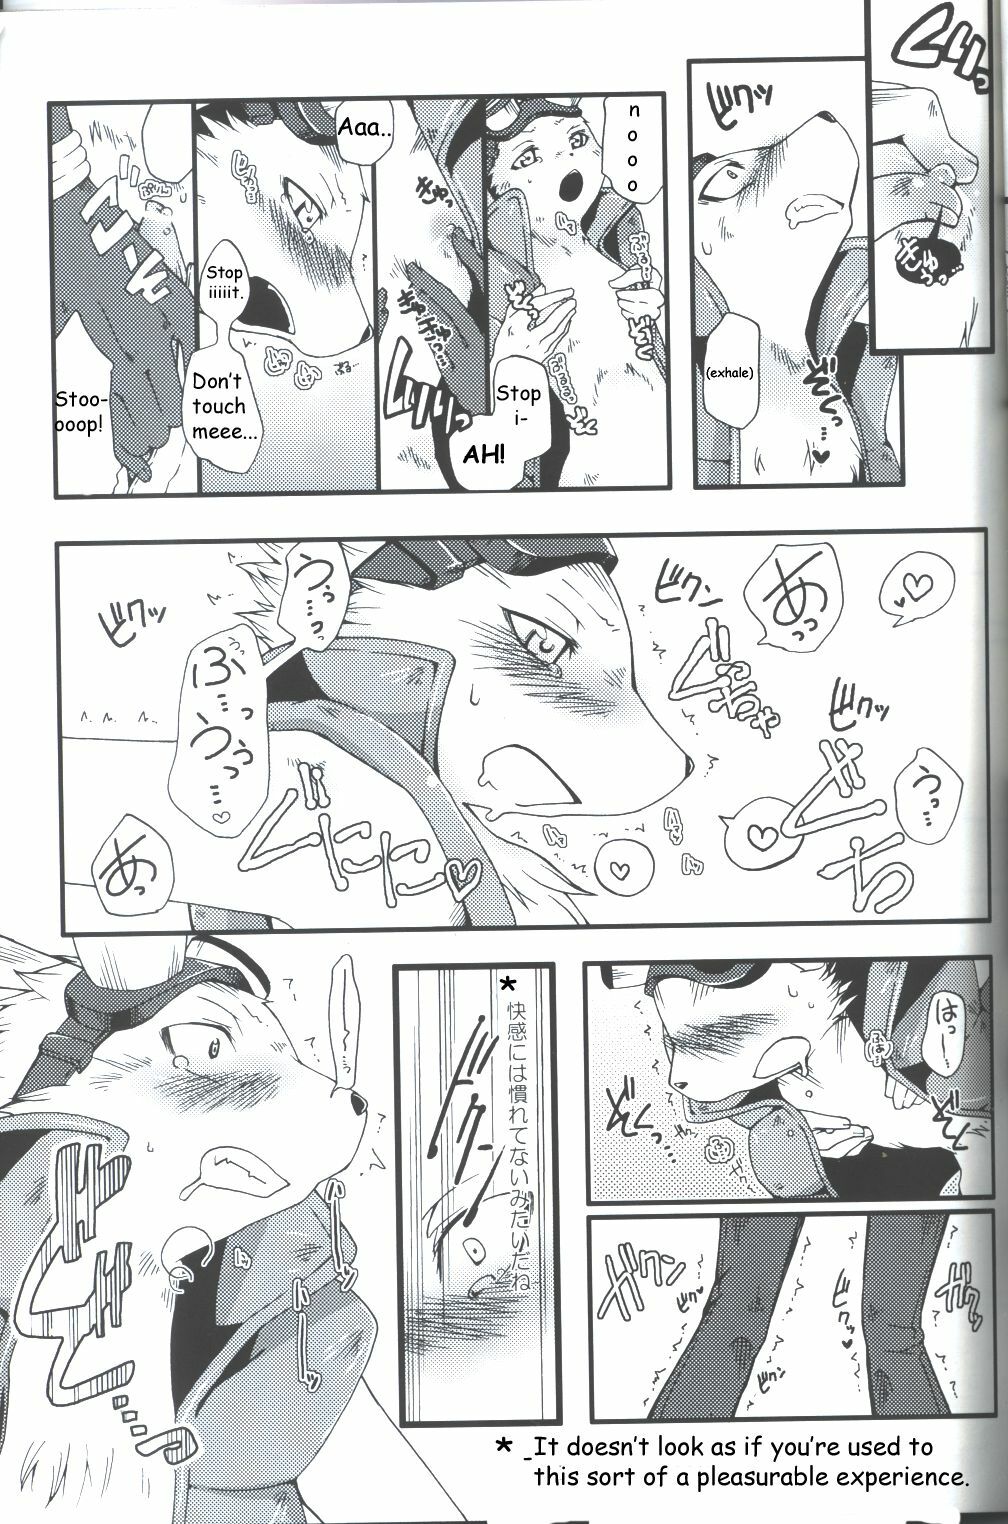 [Dogear (Inumimi Moeta)] Requirements of the King (Summer Wars) [English] page 7 full